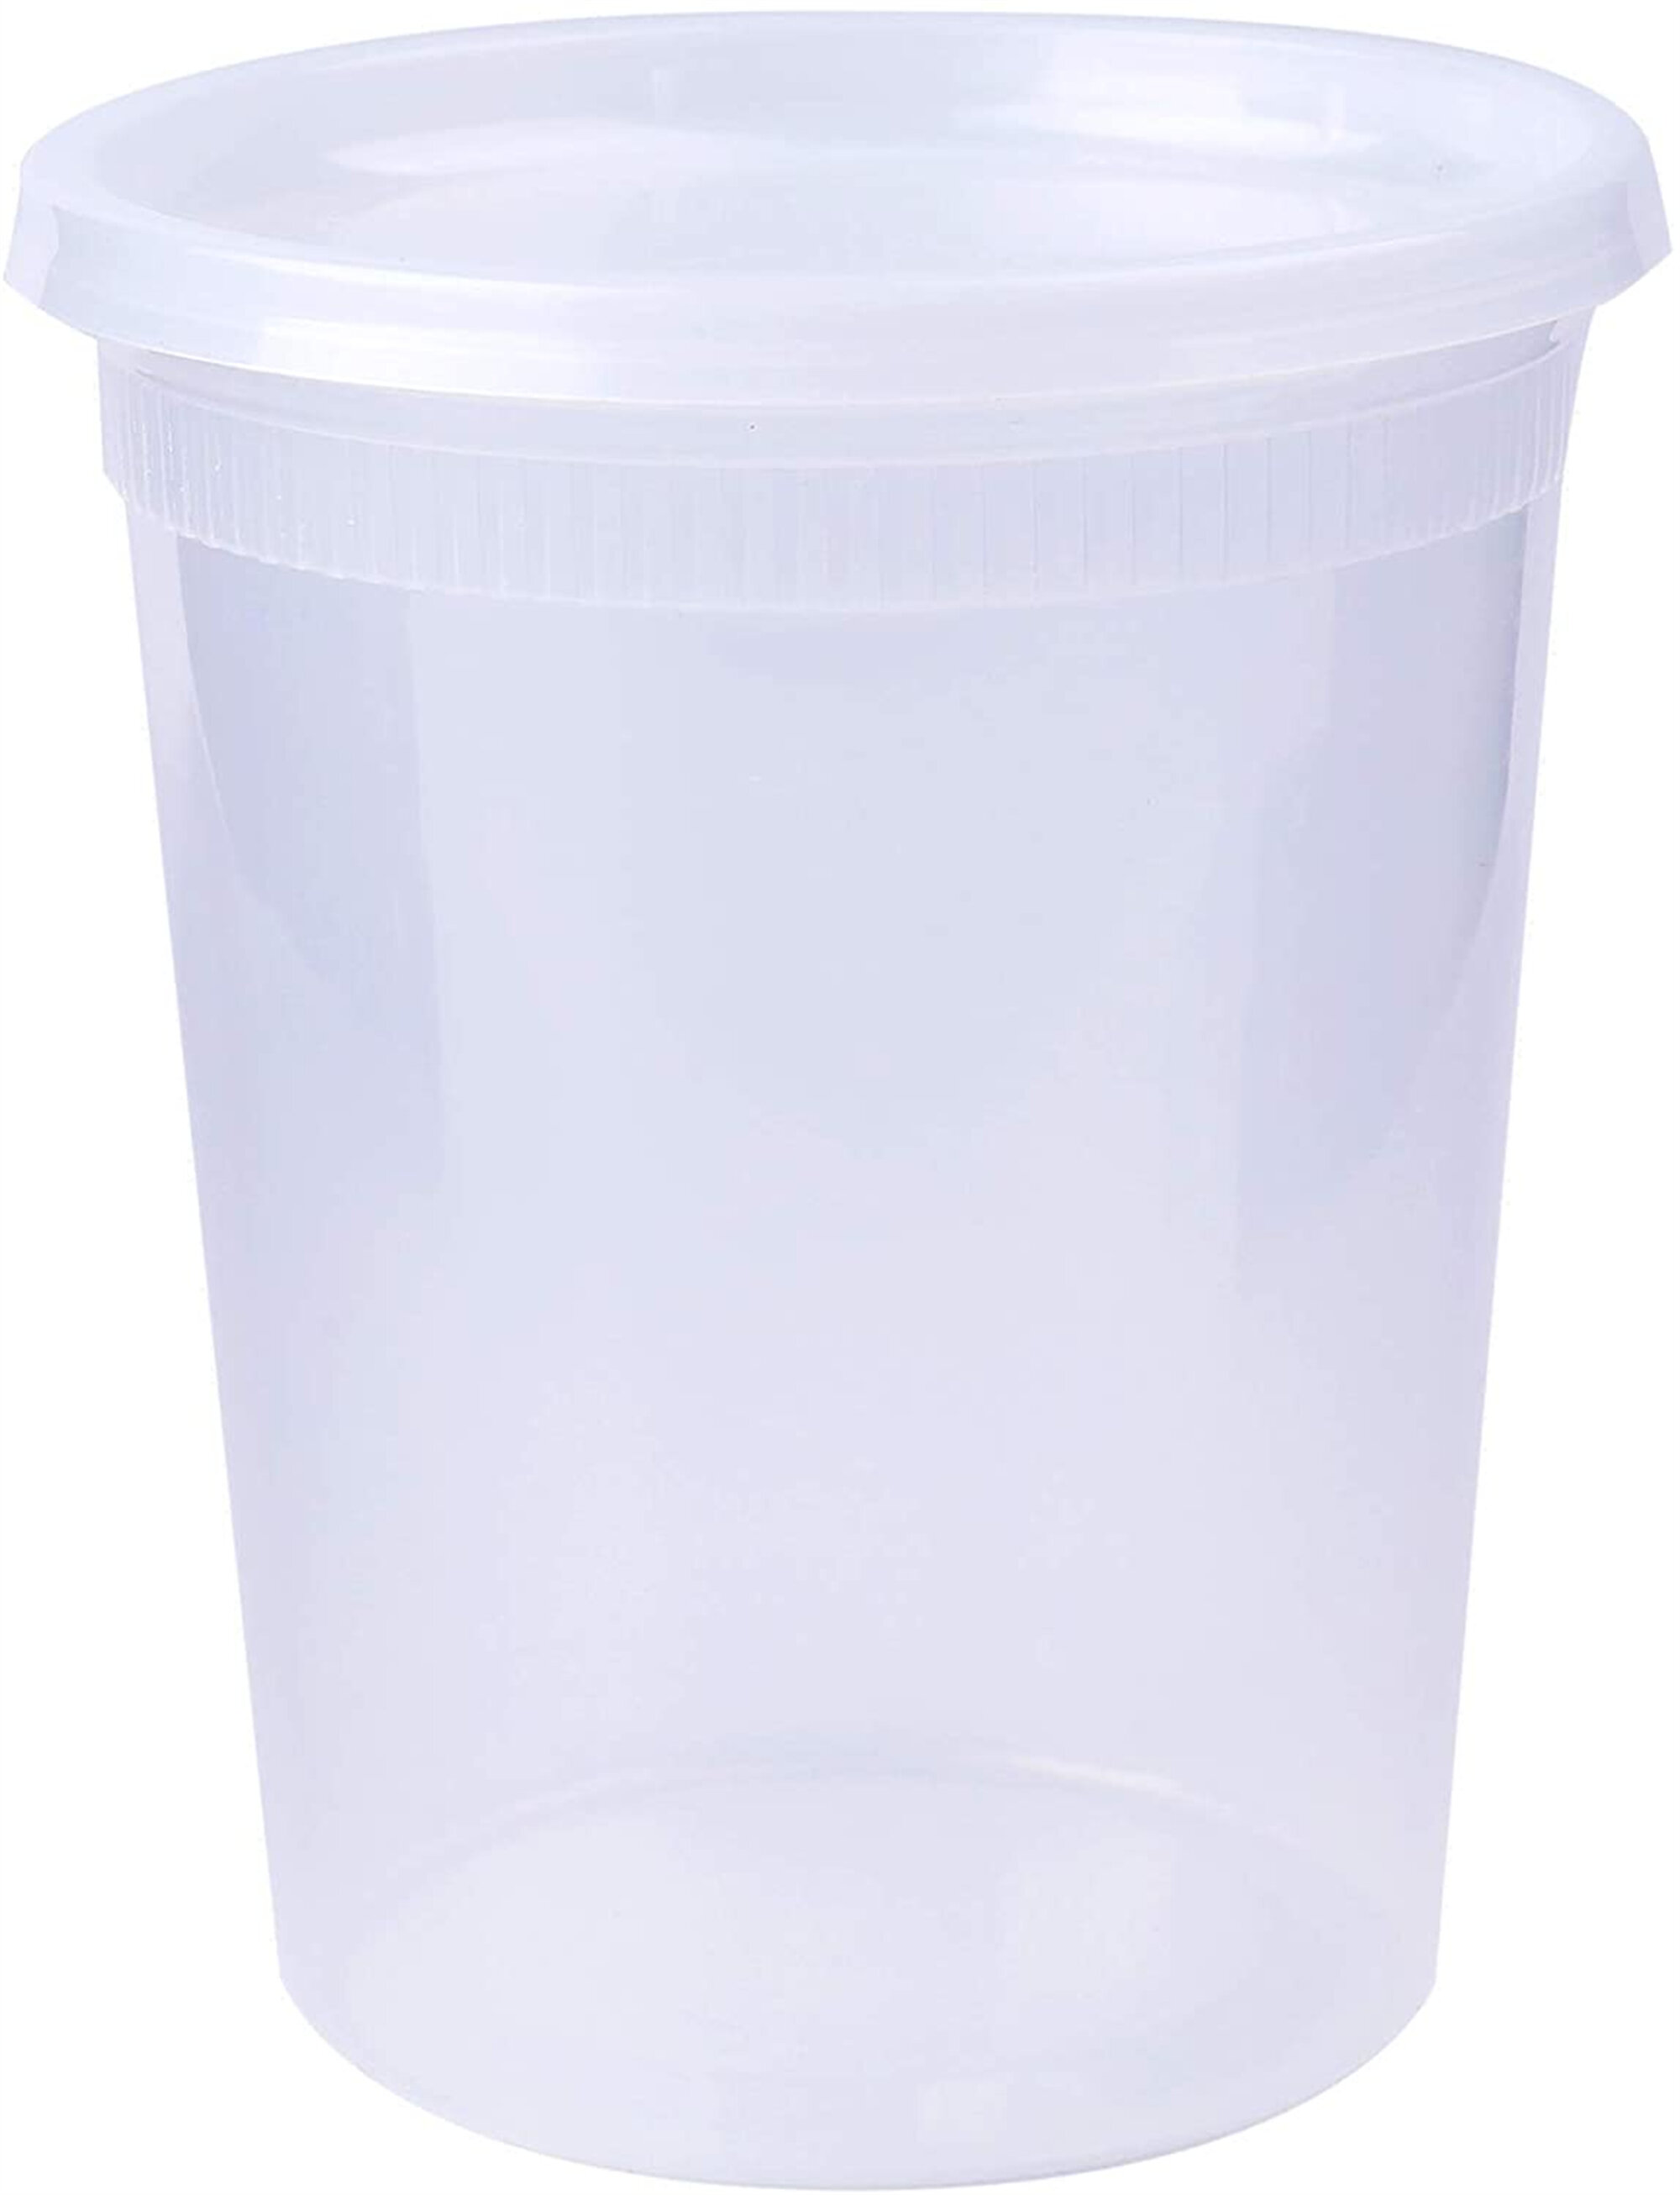 Deli Food Storage Containers Lids 50 Count Clear Take Out Travel Lunch Box 16 Oz